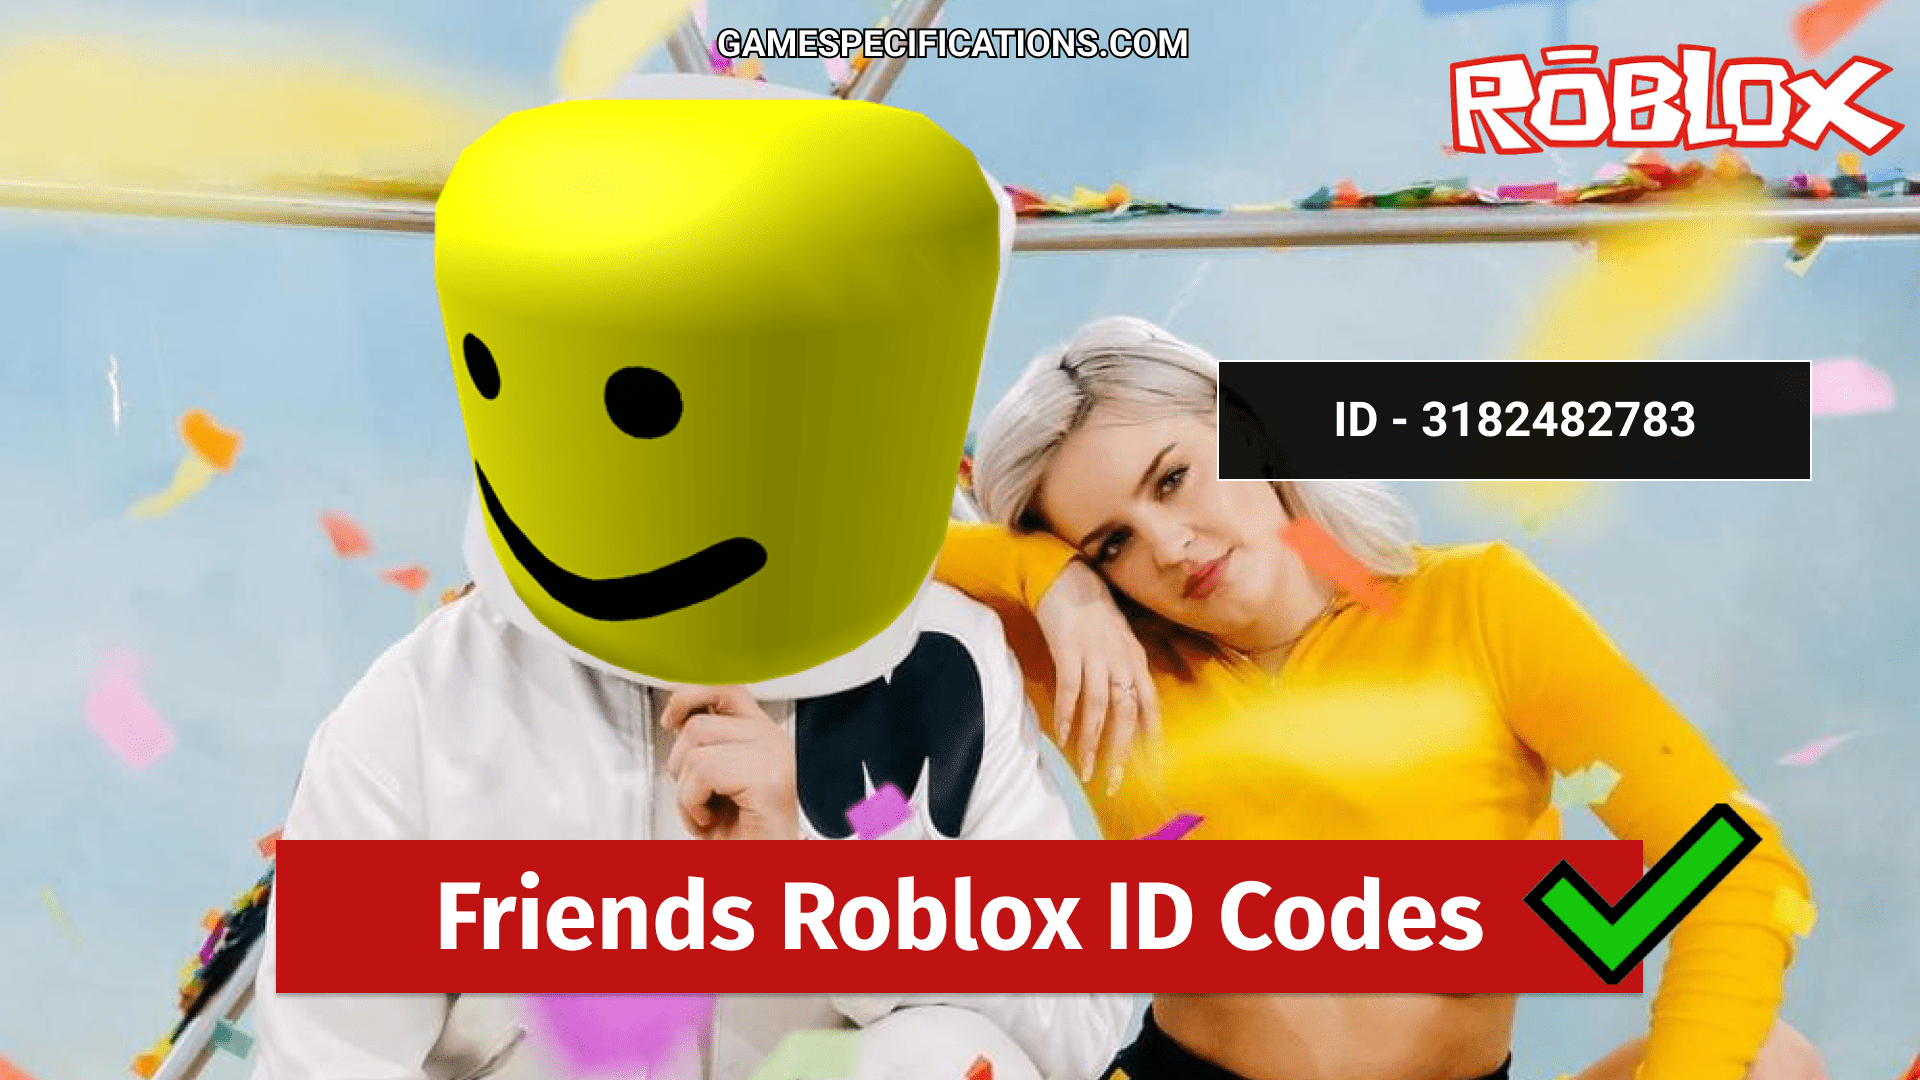 chase atlantic-Friends [Slowed] Roblox ID - Roblox music codes